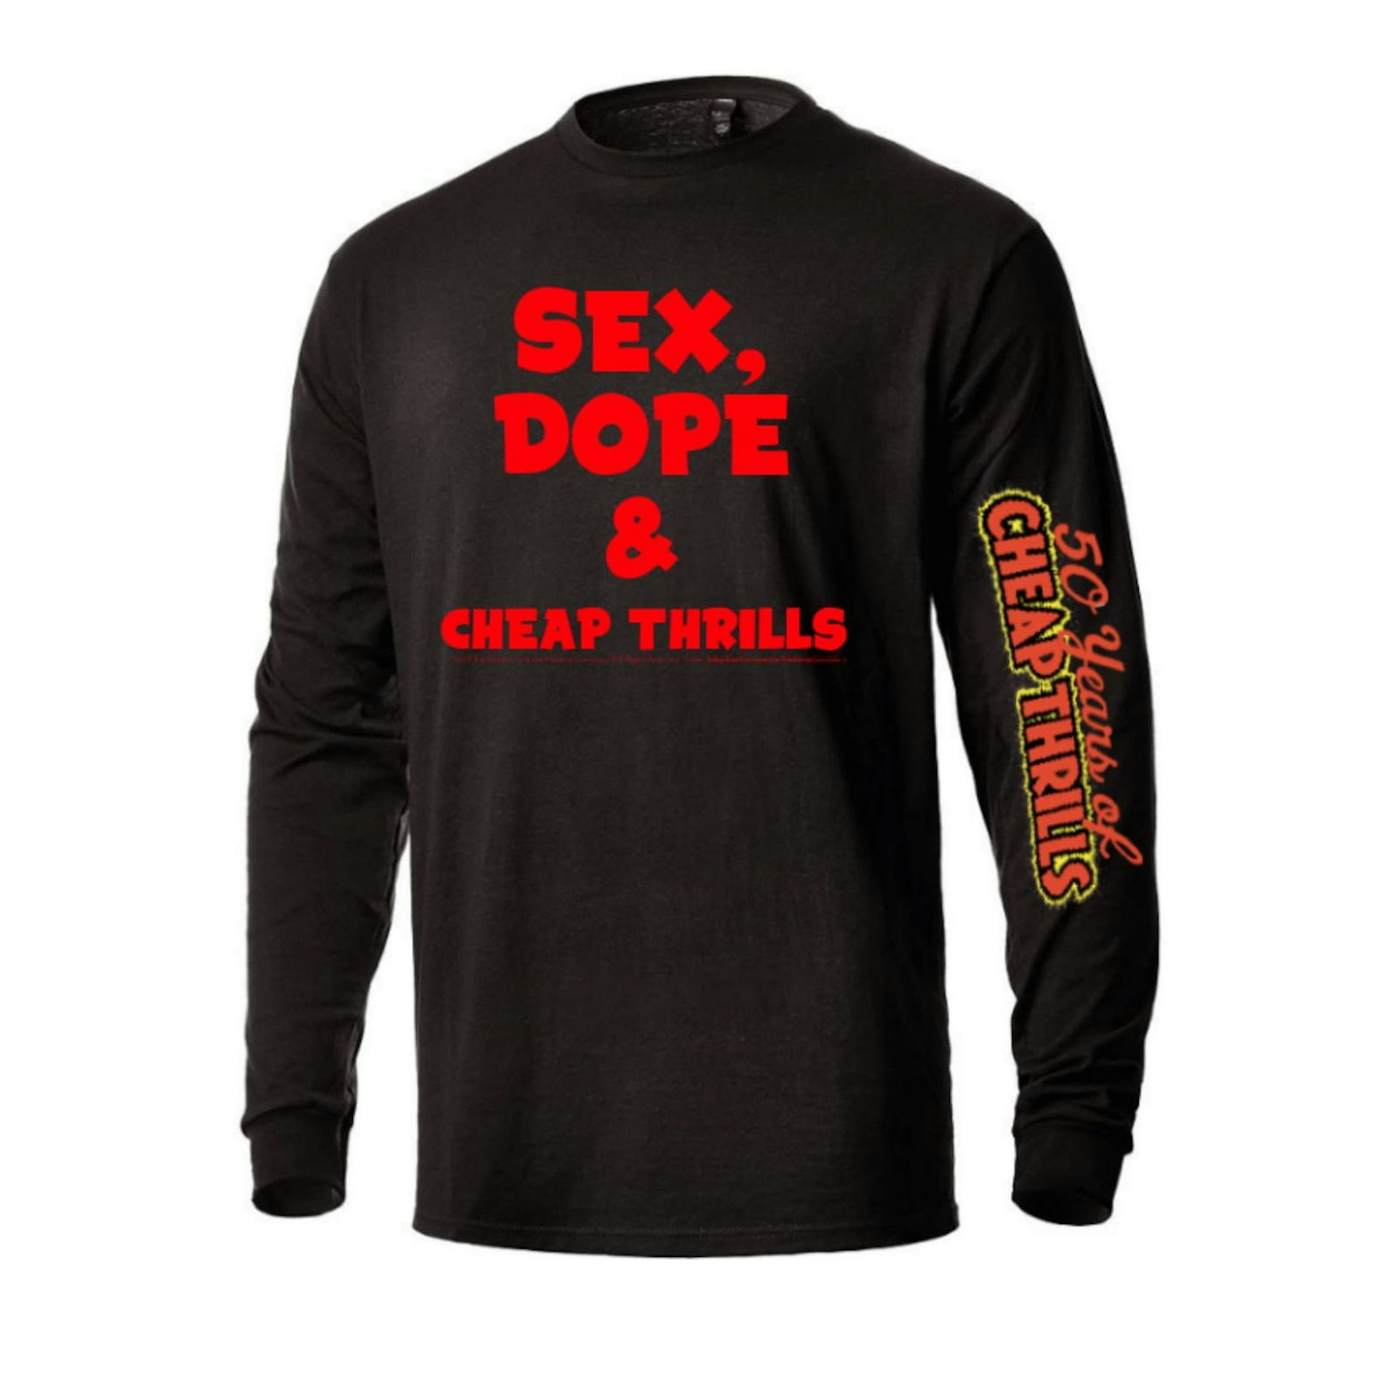 Big Brother & The Holding Company Sex, Dope & Cheap Thrills Sleeve Print Long Sleeve T-Shirt